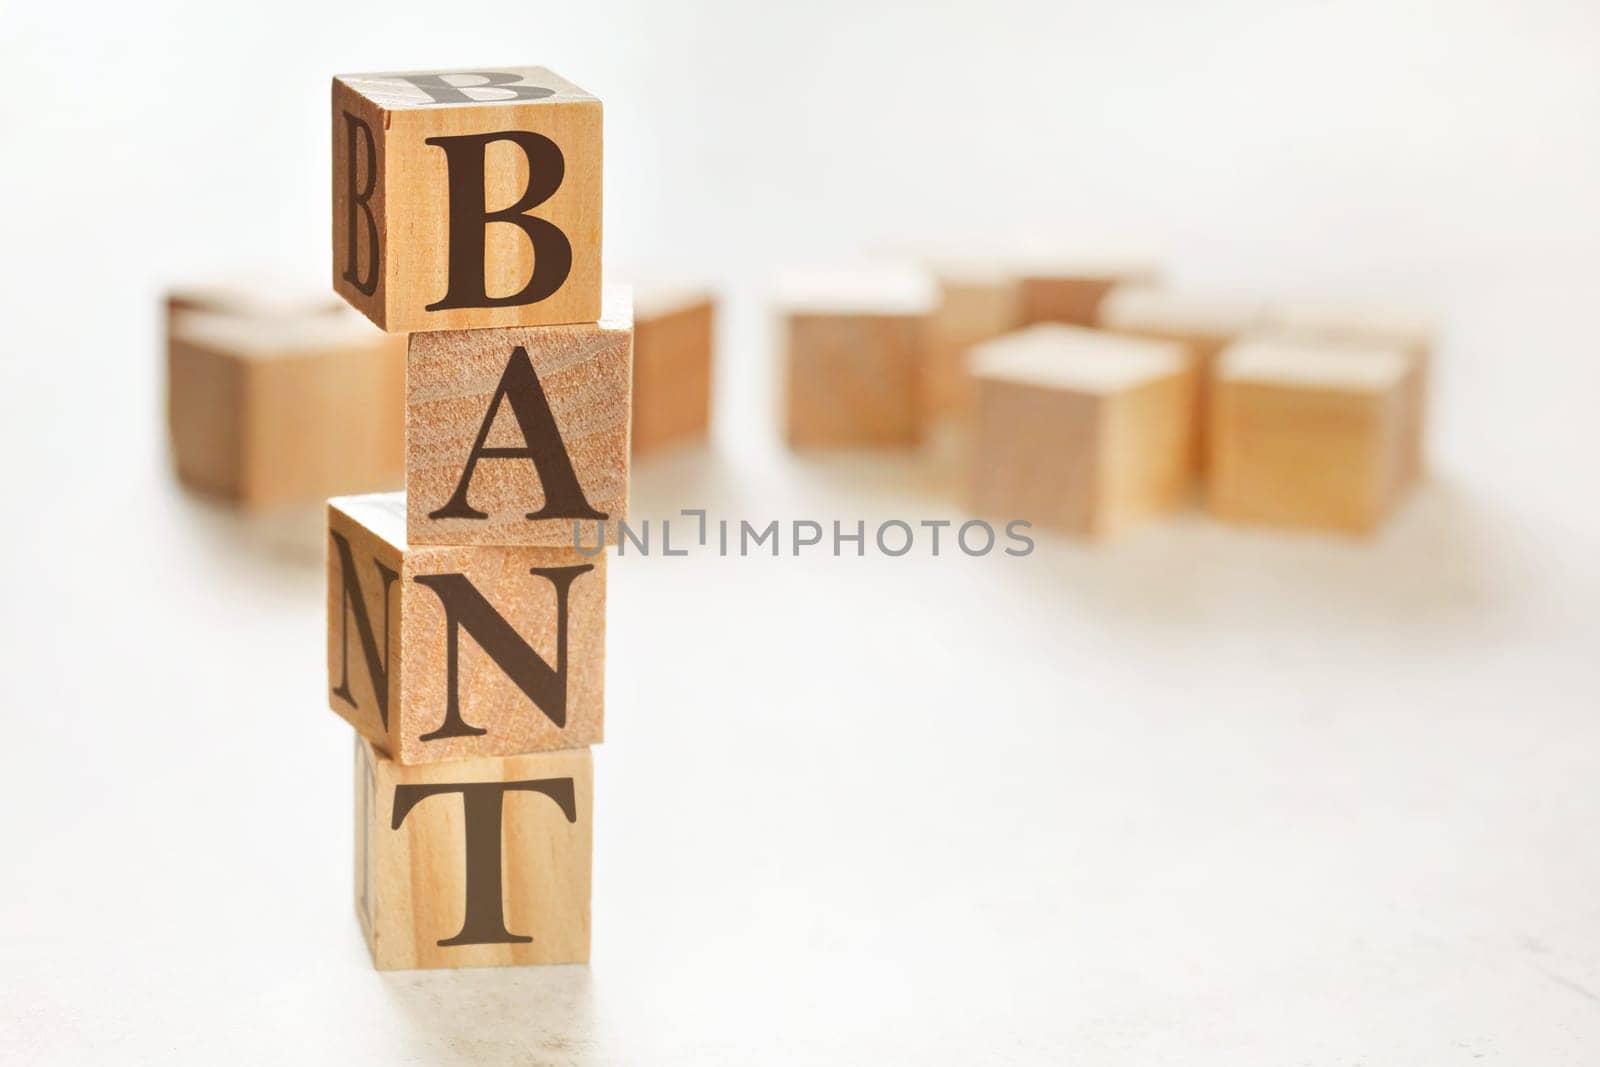 Four wooden cubes arranged in stack with letters BANT (acronym for Budget Authority Need Timeline) on them, space for text / image at down right corner